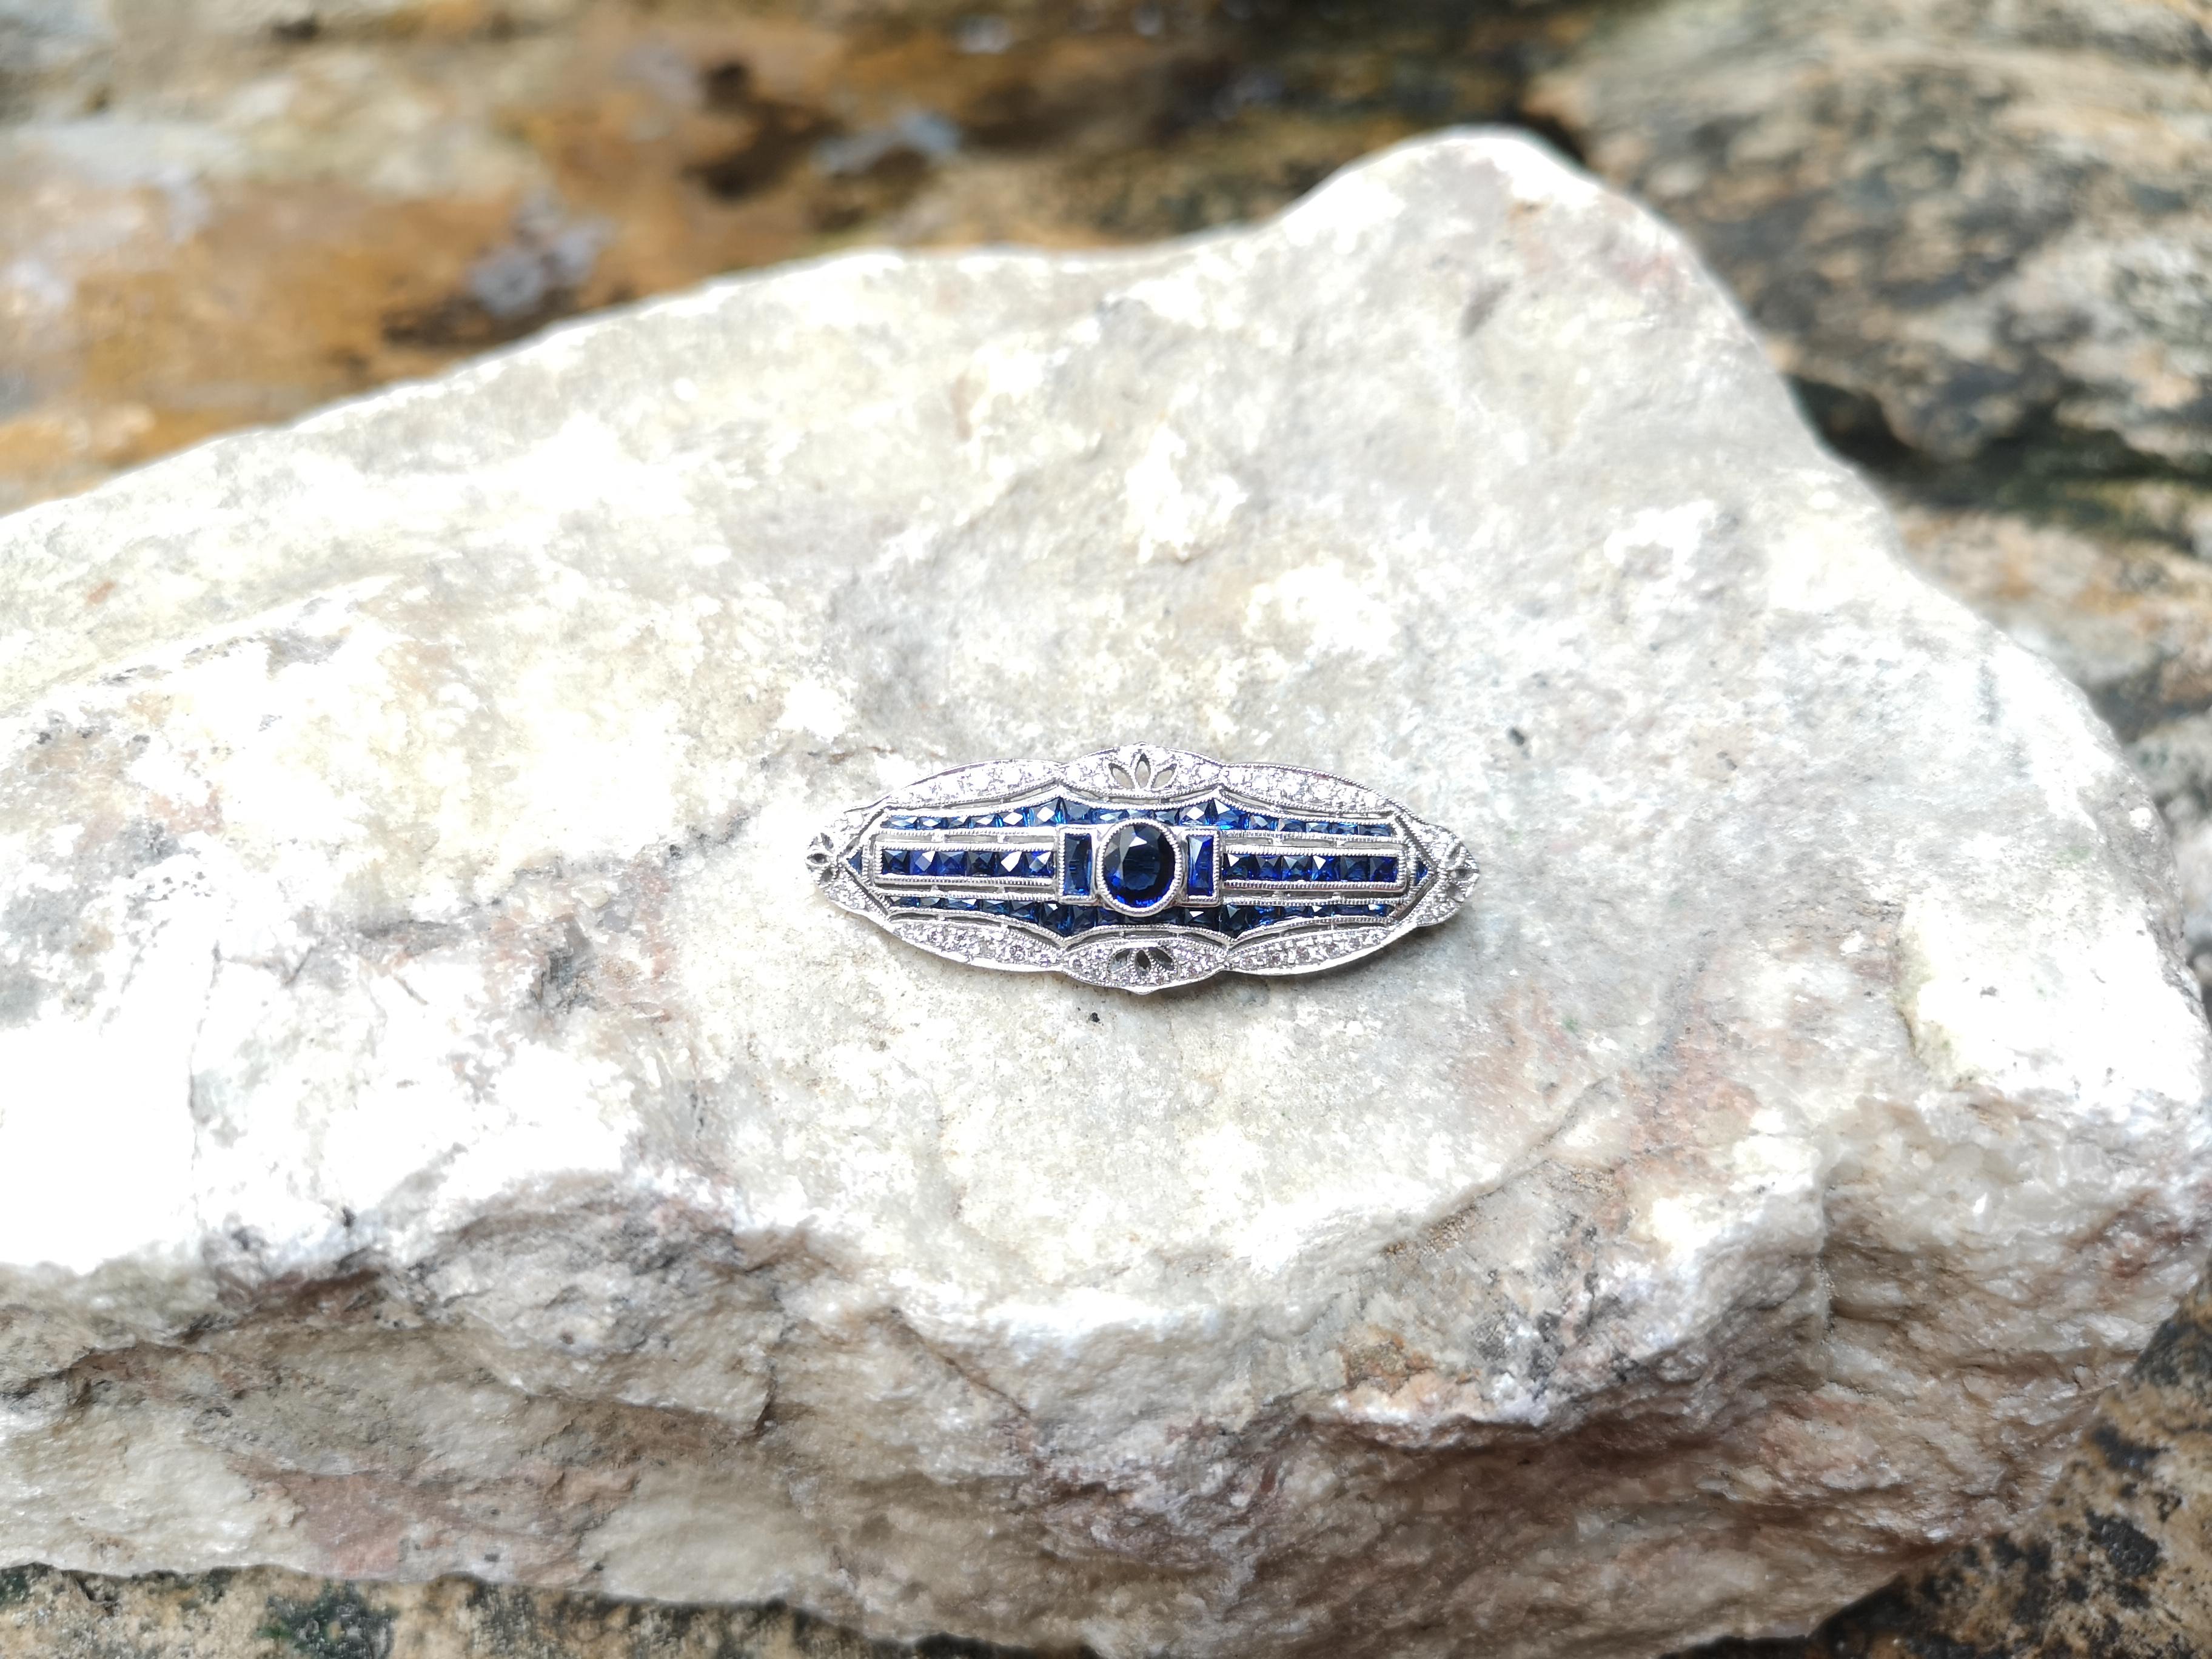 Blue Sapphire 3.33 carats with Diamond 0.51 carat Brooch set in 18 Karat White Gold Settings

Width:  4.5 cm 
Length: 1.8 cm
Total Weight: 9.77 grams

